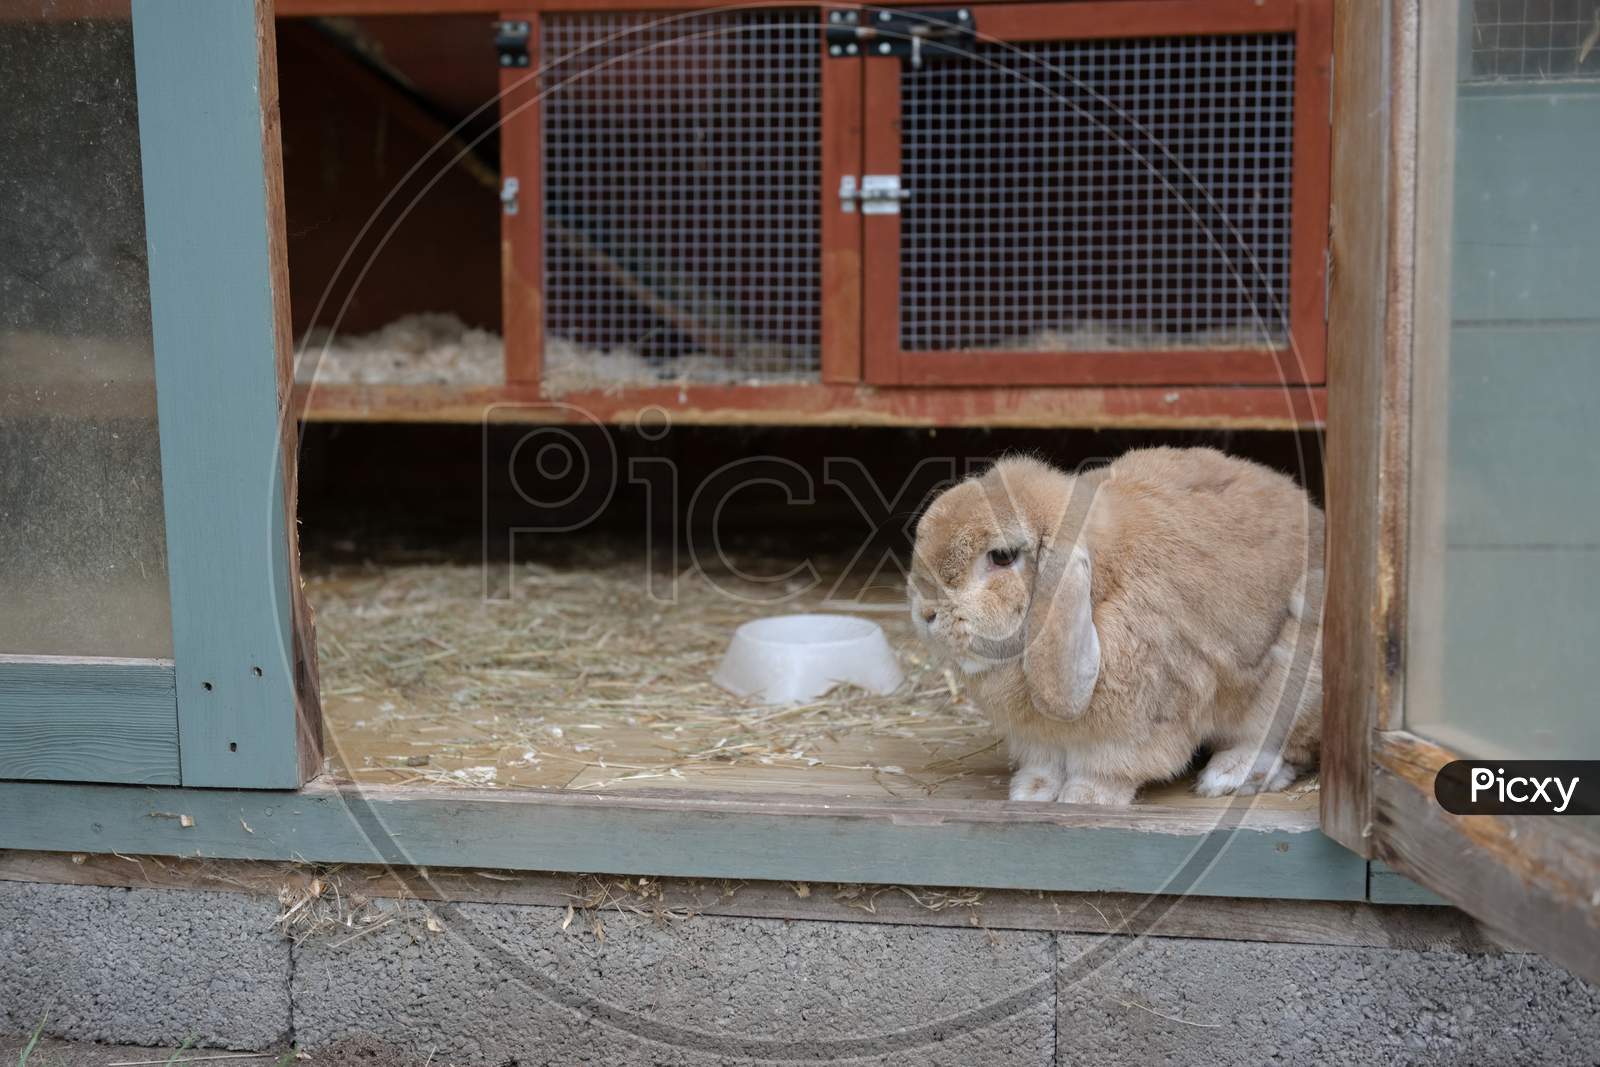 Small Lop Ear Pet Rabbit Looks Out From Hutch Within A Shed.